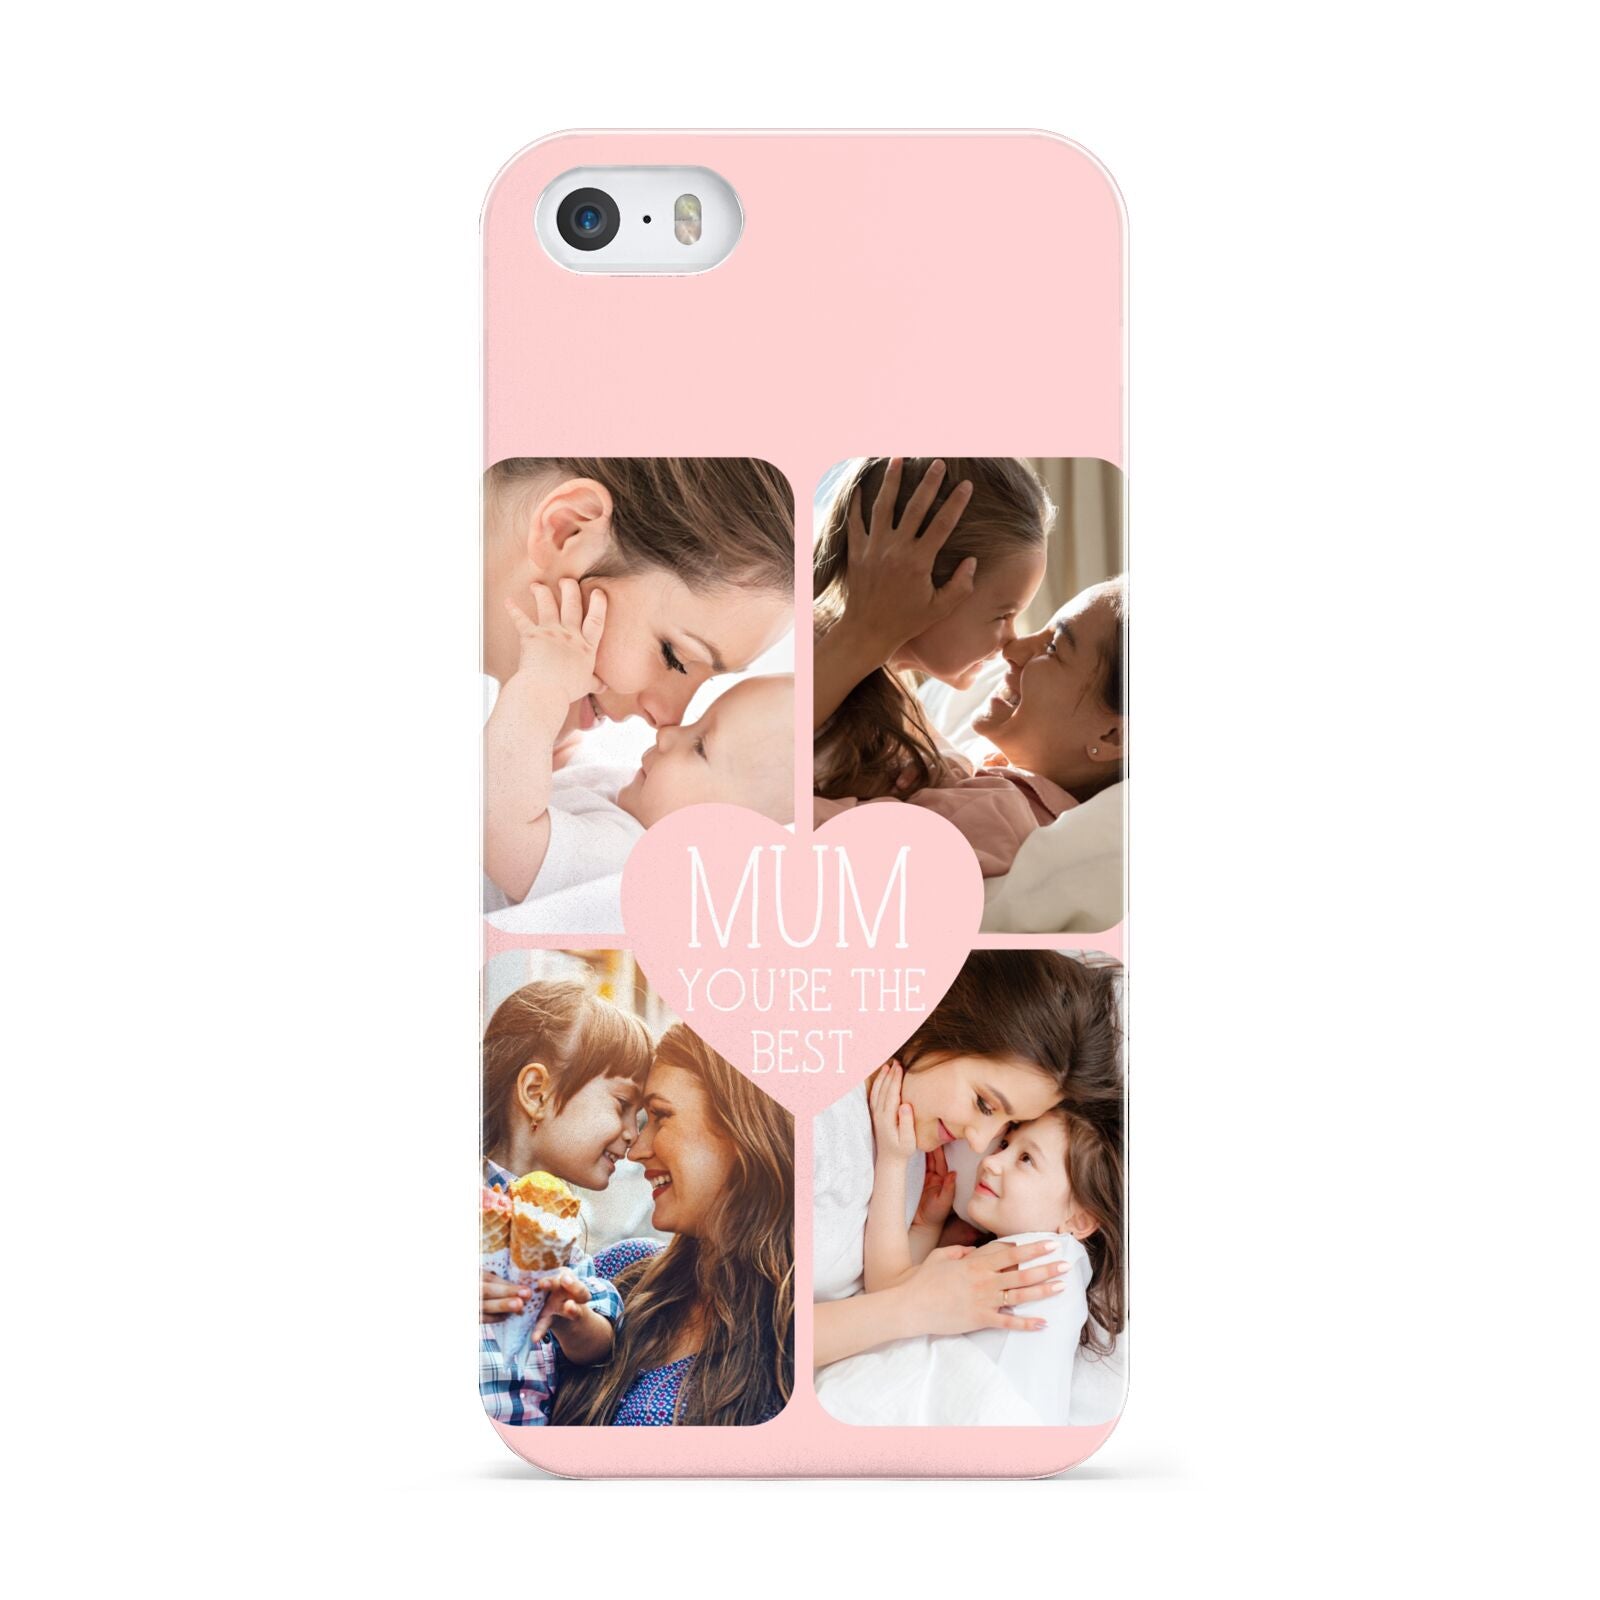 Mothers Day Four Photo Upload Apple iPhone 5 Case